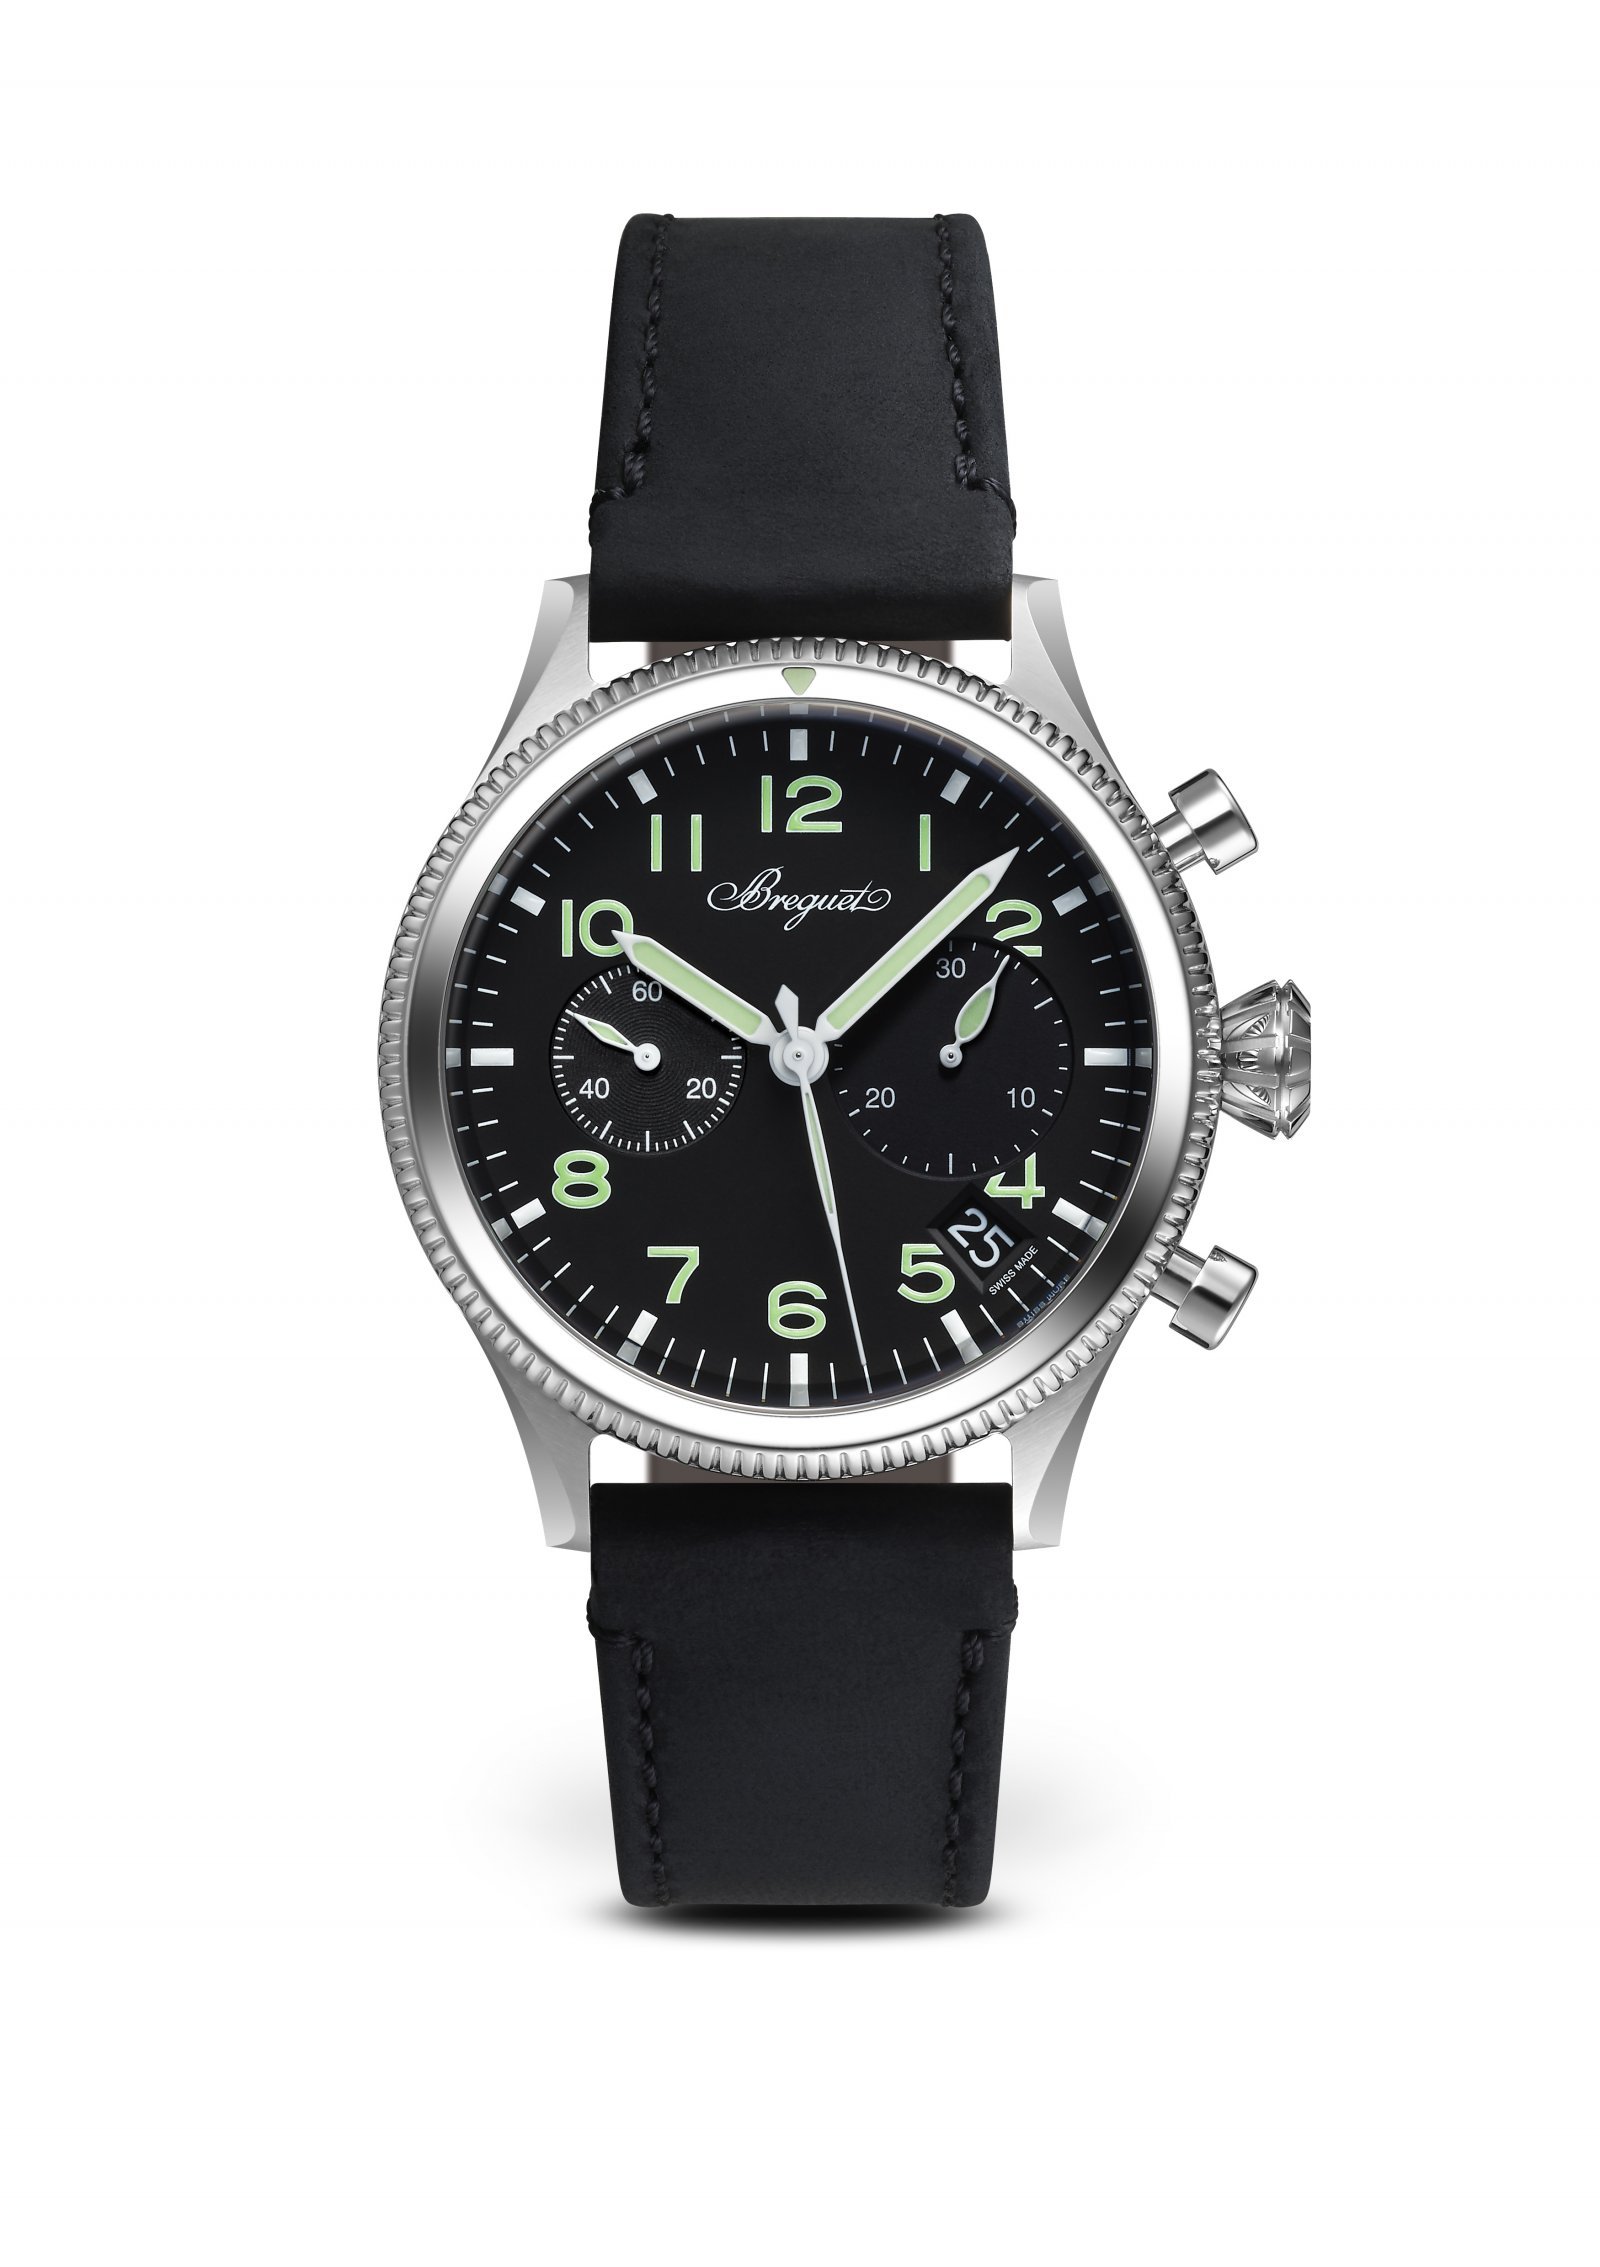 Breguet_2057_Type20_Face_Black_Leather_Strap_low.jpg